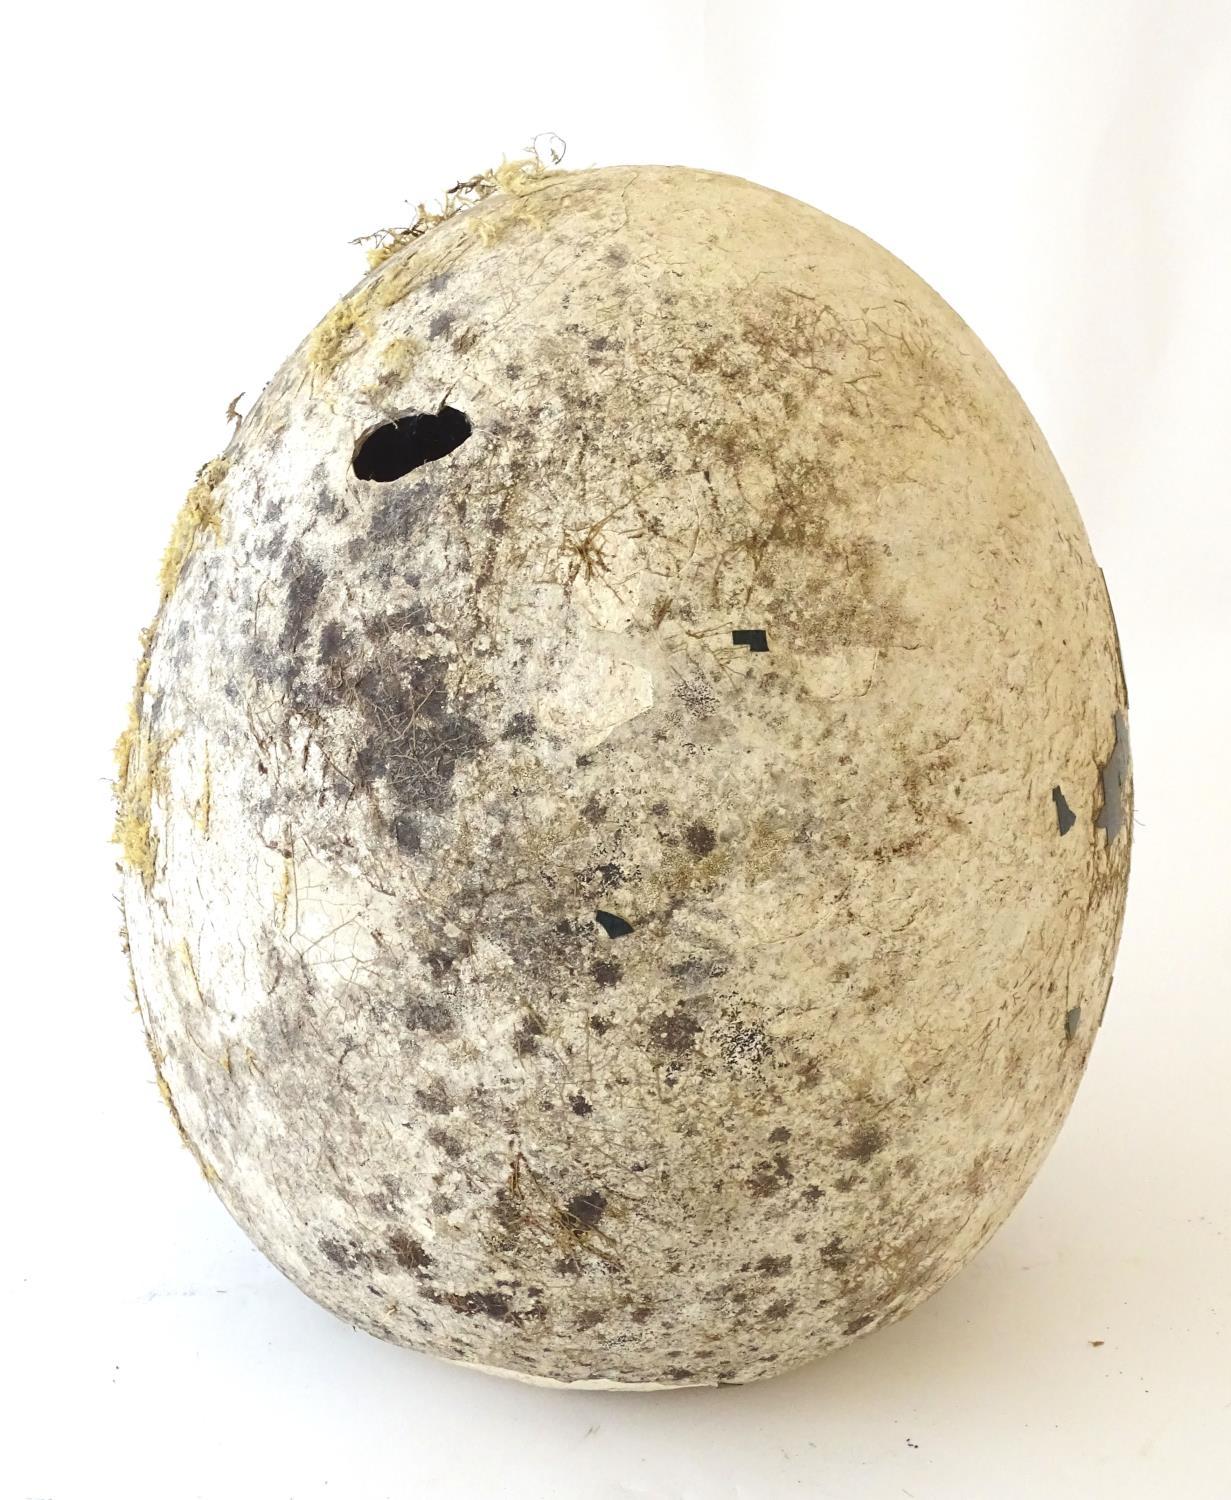 A novelty, oversize ornithological display/film prop model egg, ceramic, 14 1/2" tall Notice to - Image 4 of 5